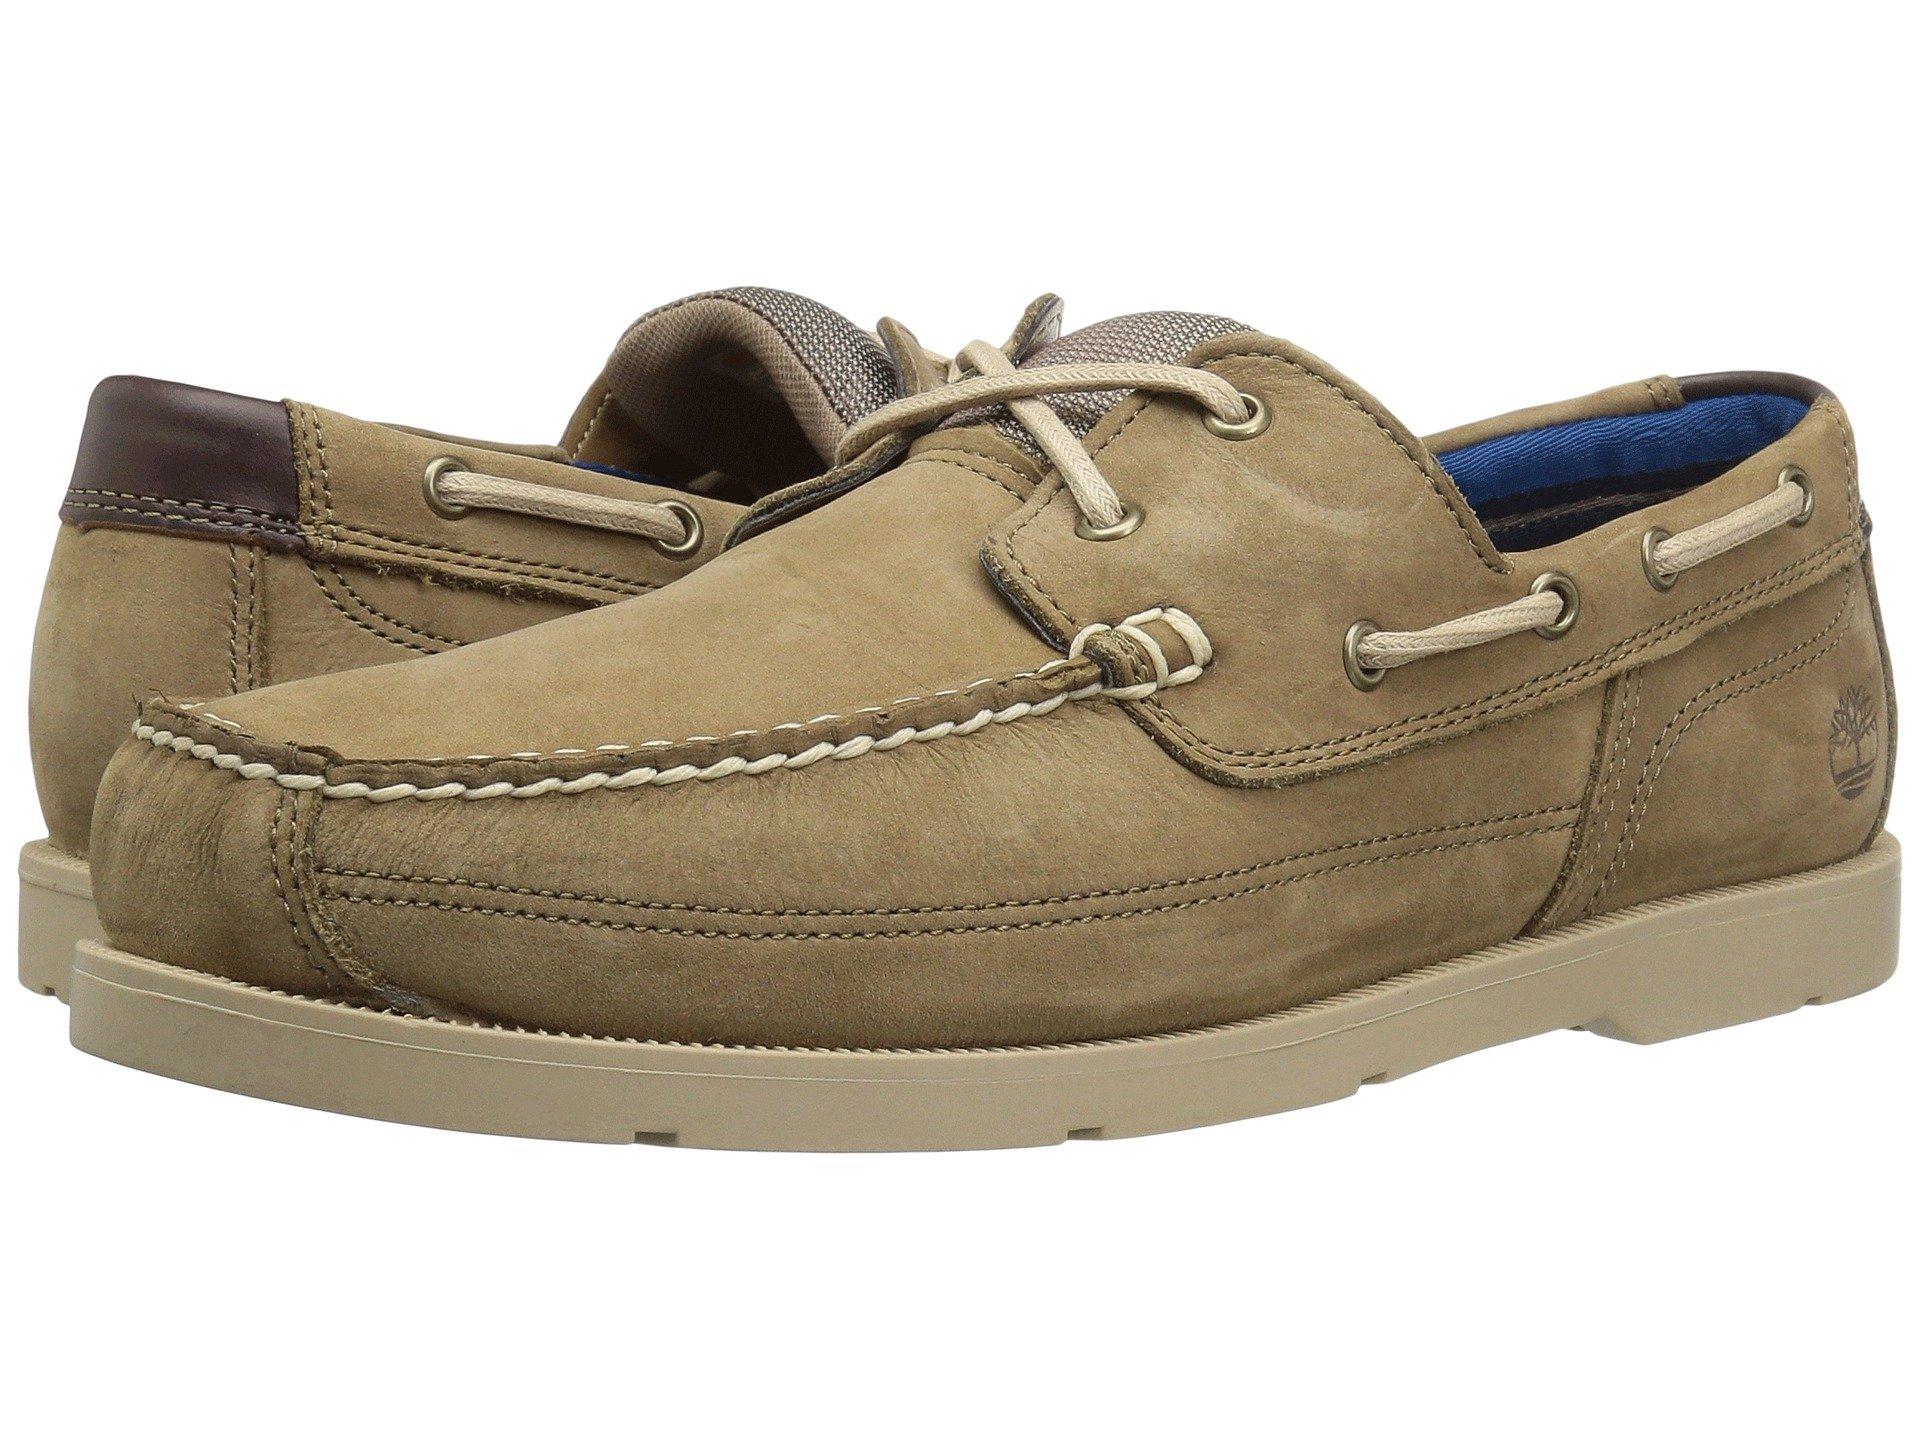 Timberland Piper Cove Leather Boat Shoe in Brown for Men - Lyst